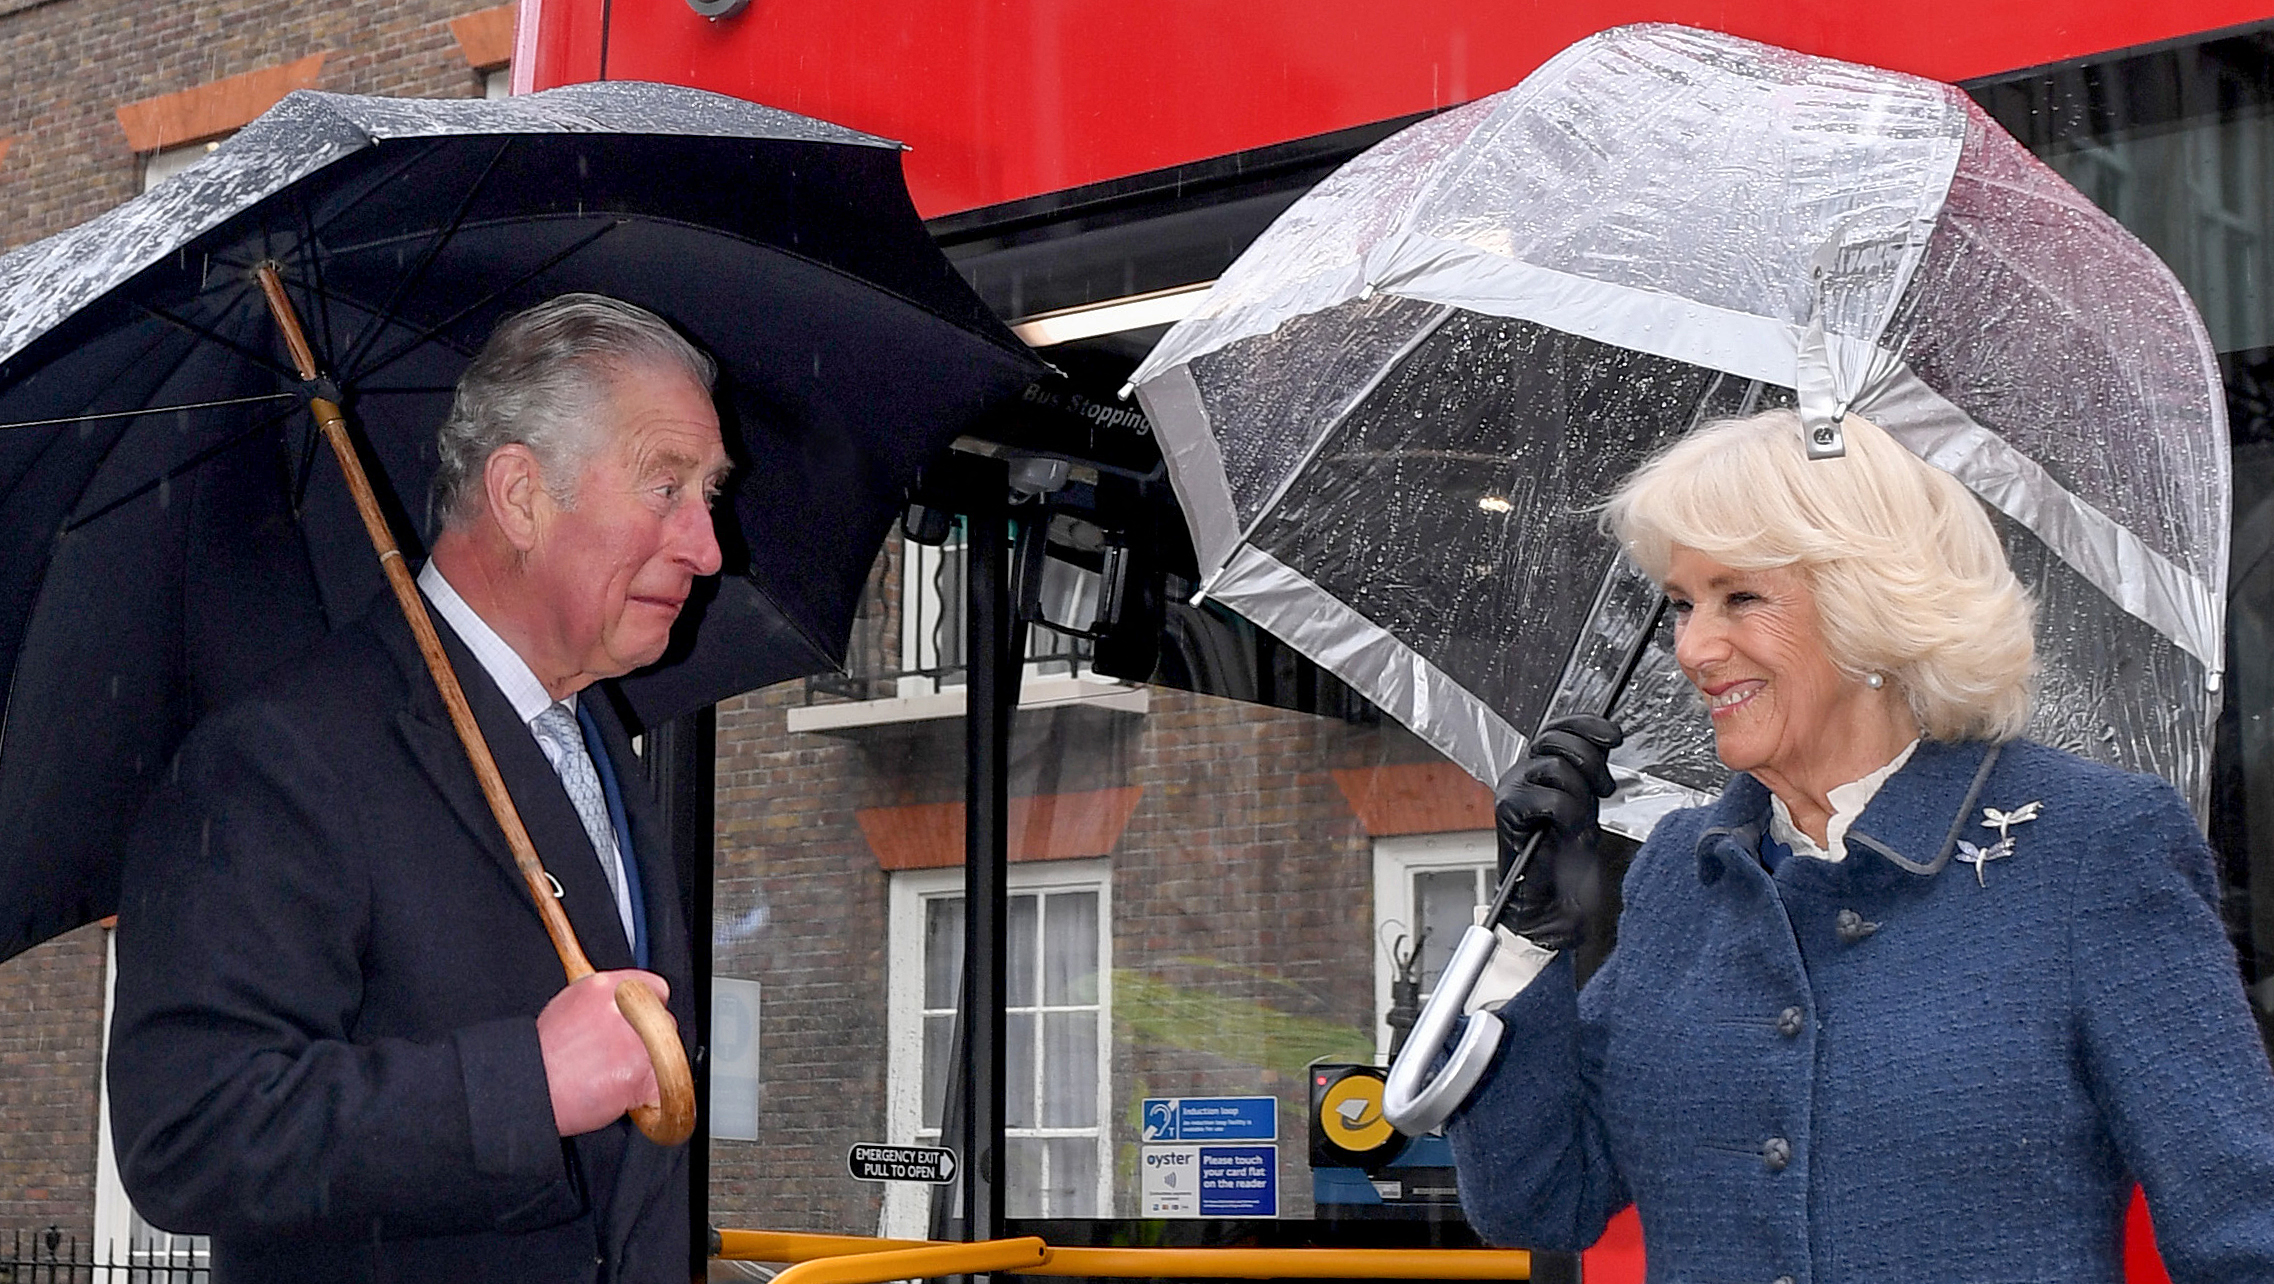 Then Prince Charles and Camilla, Duchess of Cornwall in London, on March 4, 2020 | Source: Getty Images